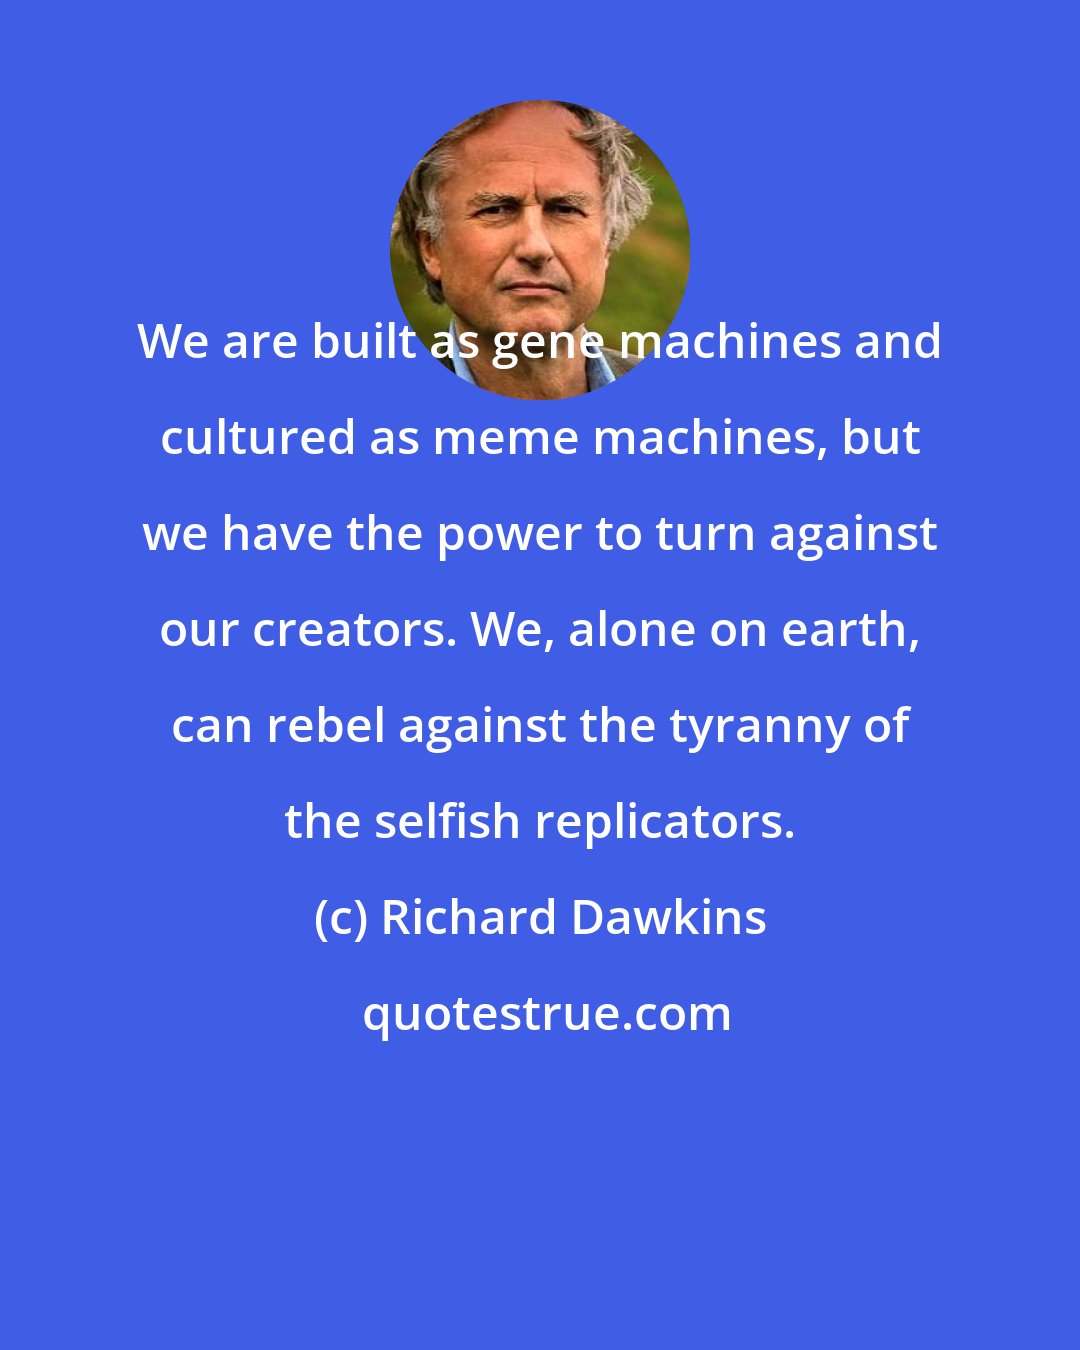 Richard Dawkins: We are built as gene machines and cultured as meme machines, but we have the power to turn against our creators. We, alone on earth, can rebel against the tyranny of the selfish replicators.